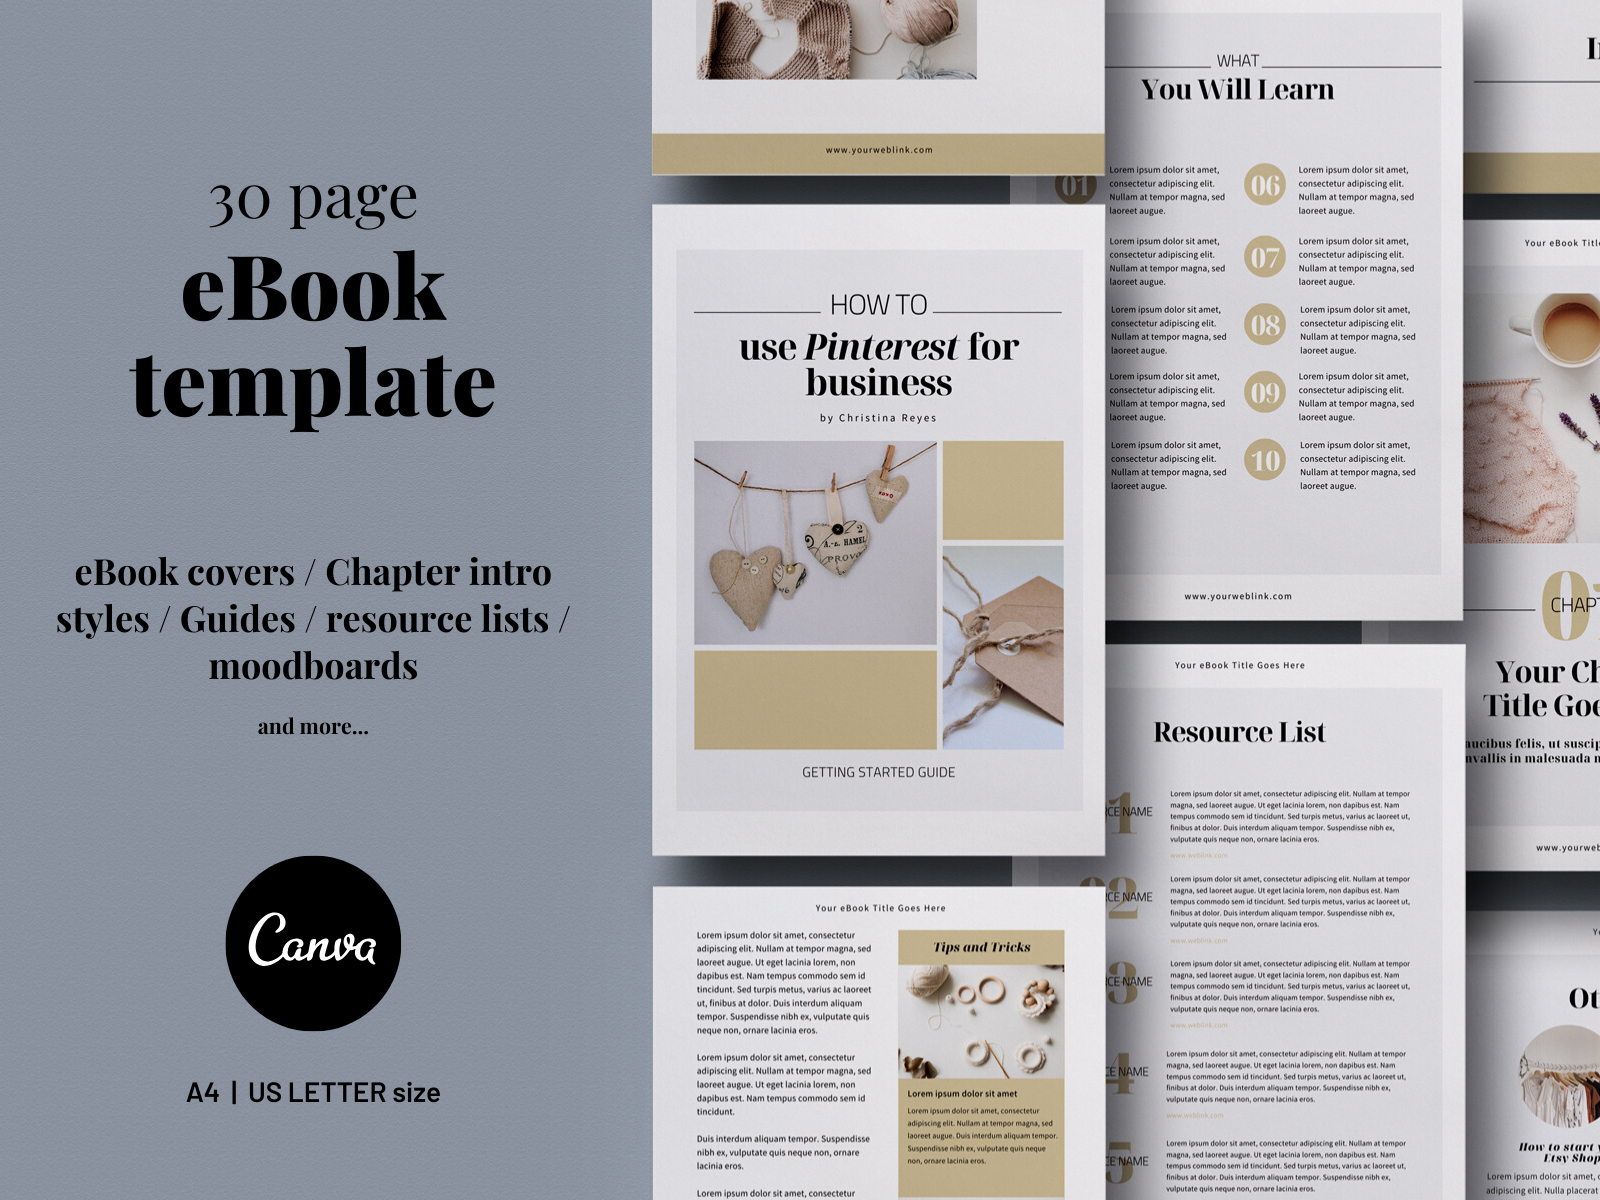 30page Canva eBook template by Olga Davydova on Dribbble